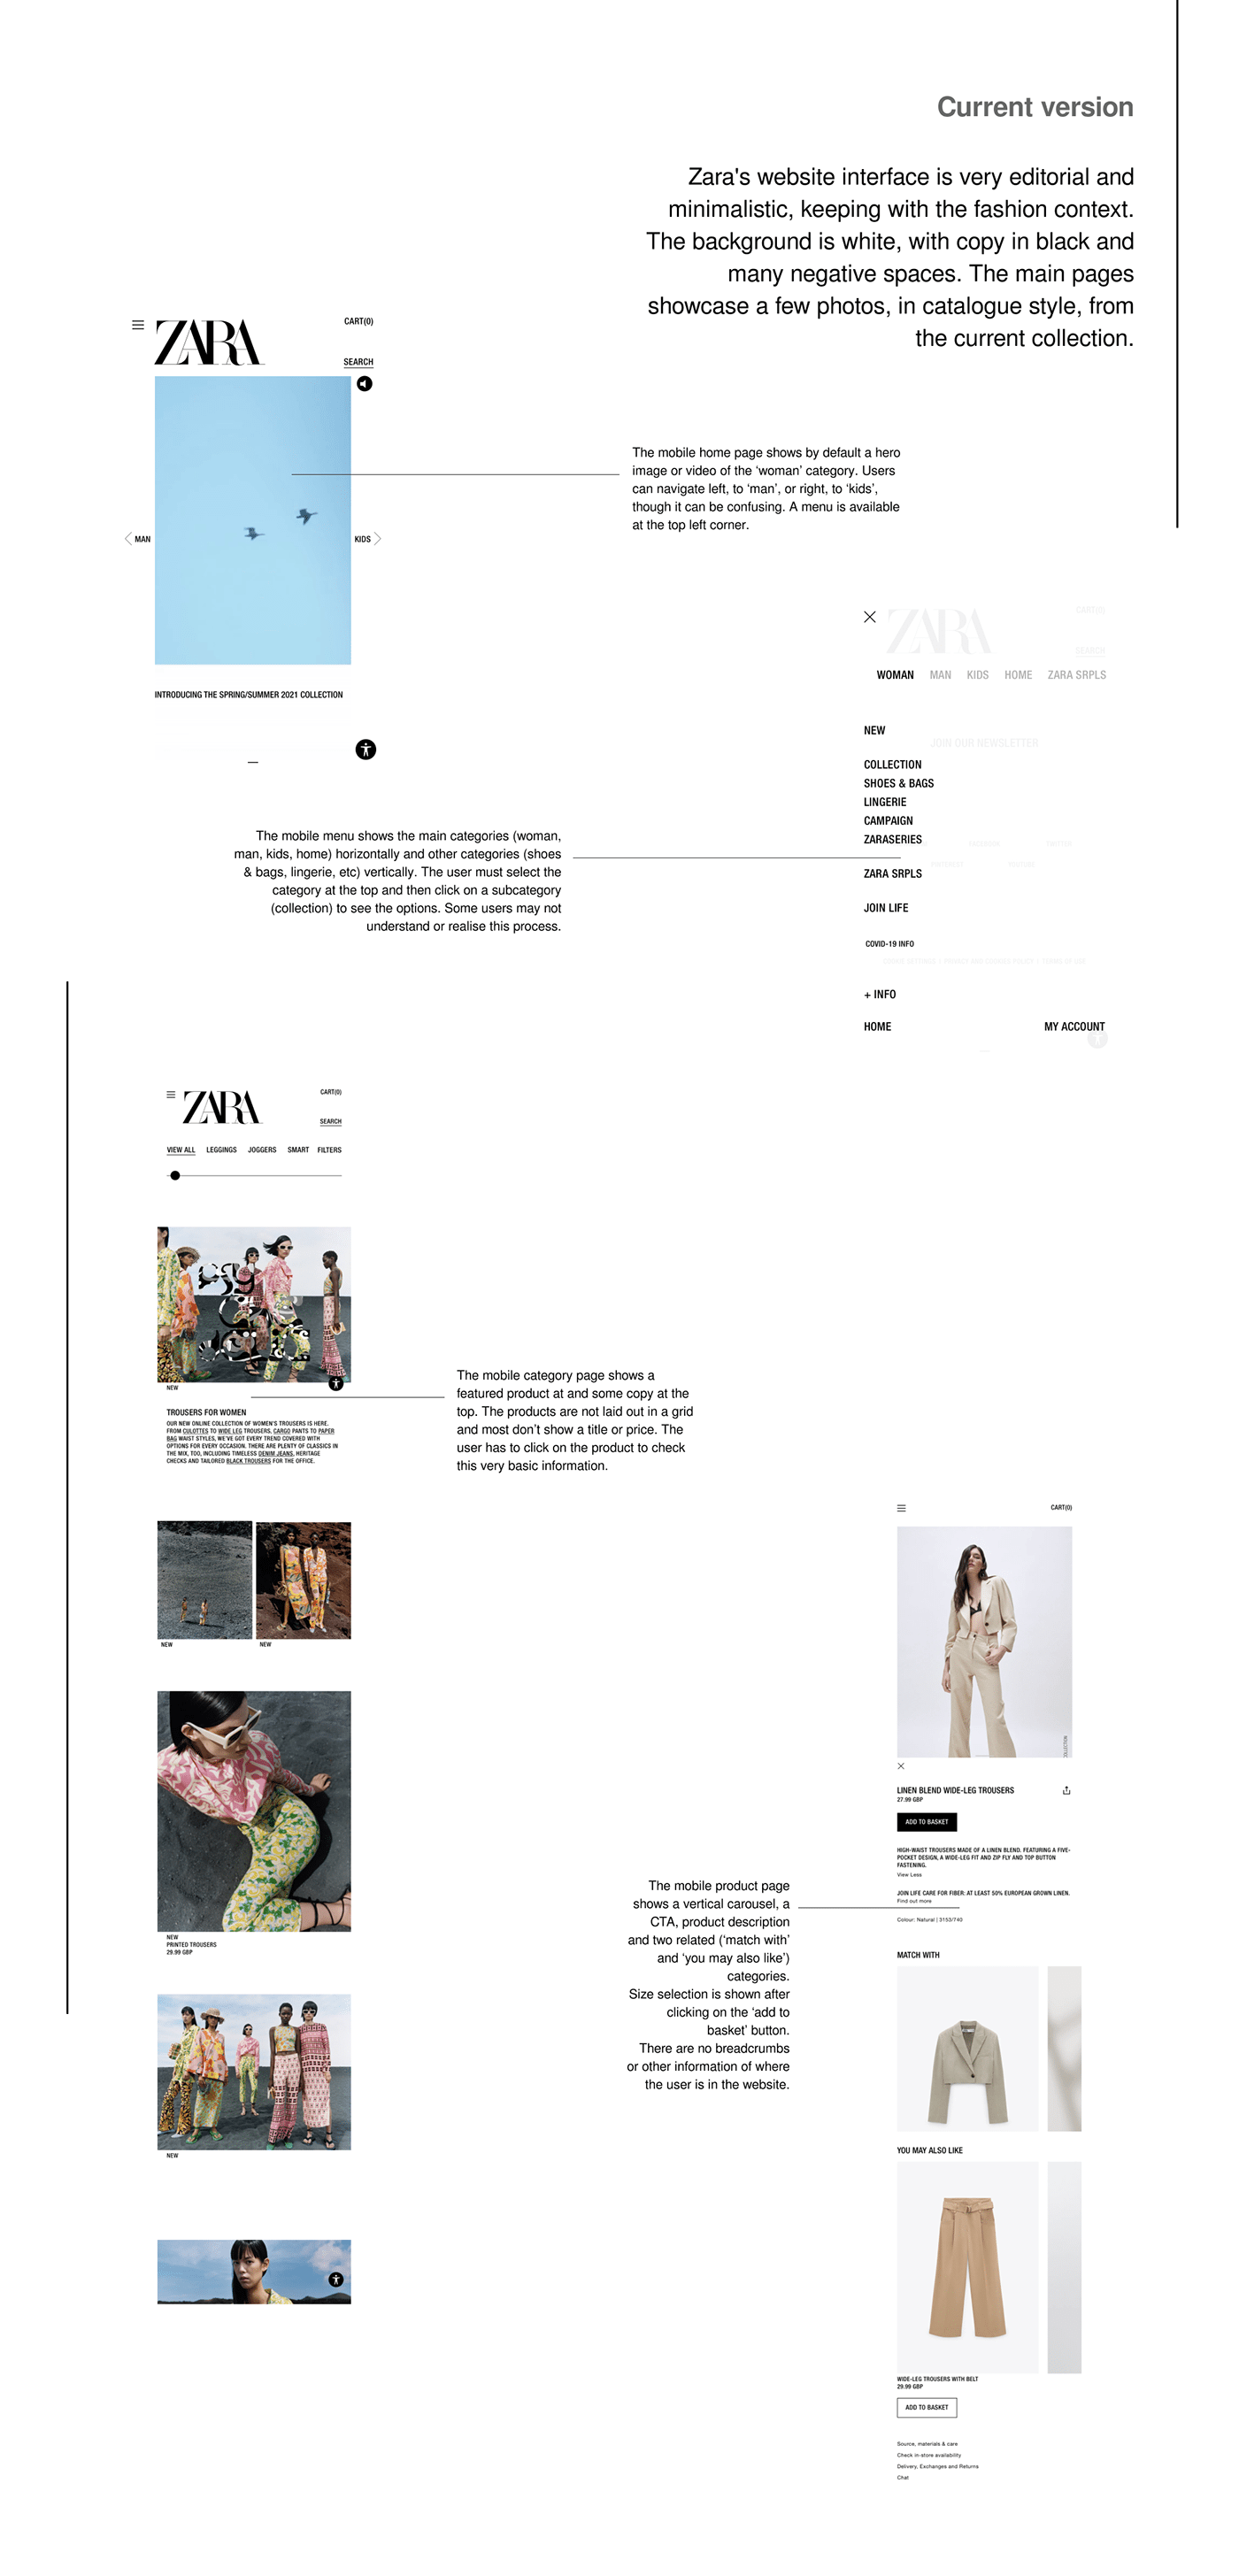 Case Study Ecommerce Mobile first Responsive UI ux Website zara user experience UX Research